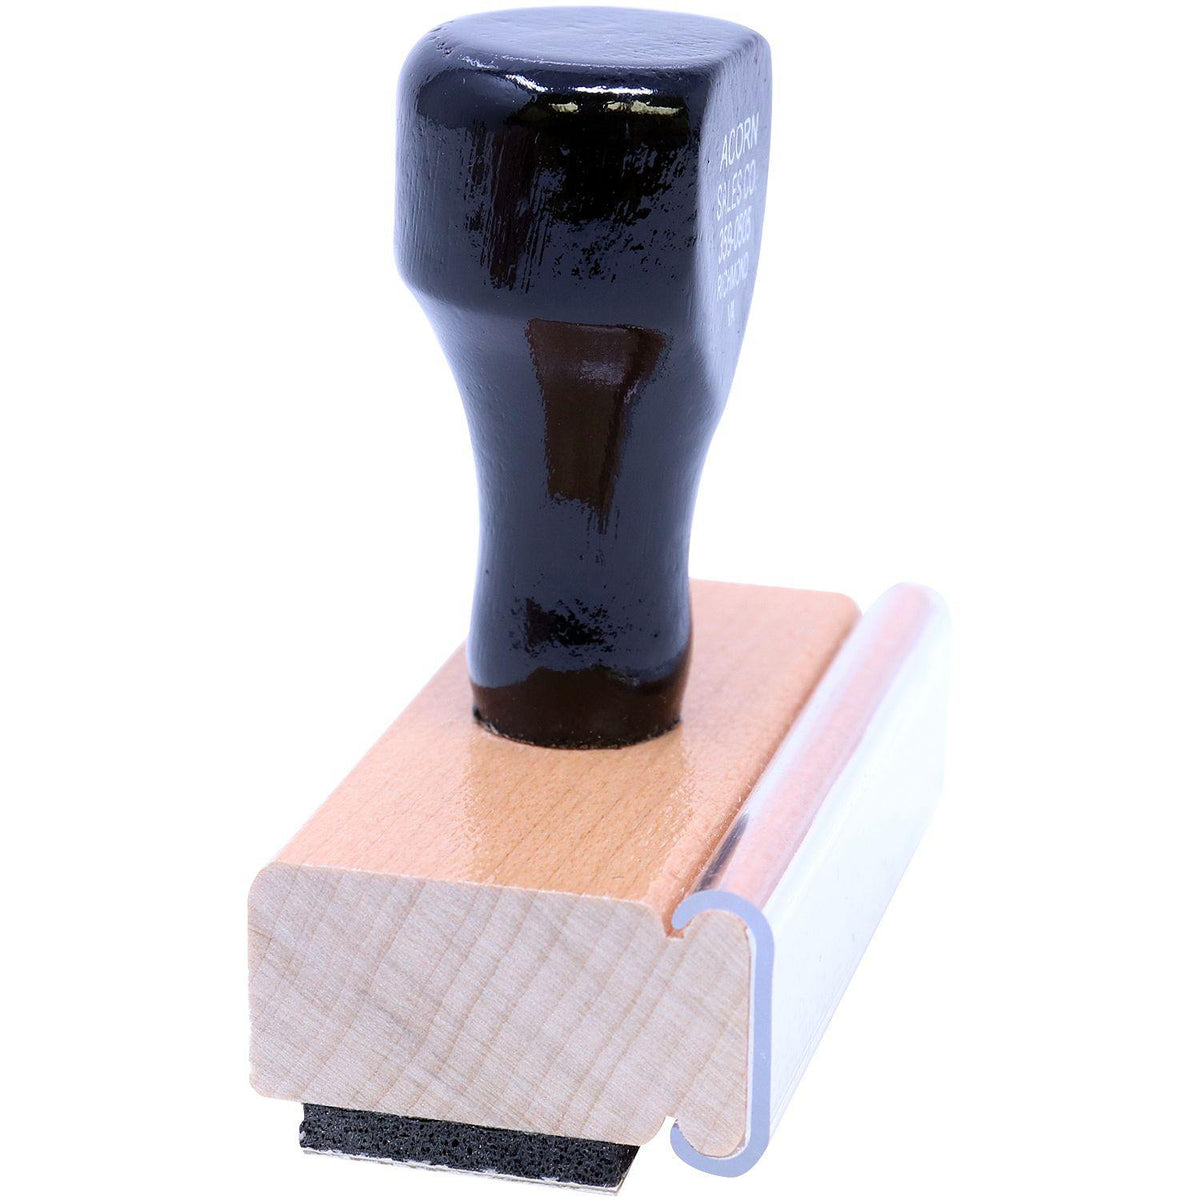 Side View of Large Priority Rubber Stamp at an Angle